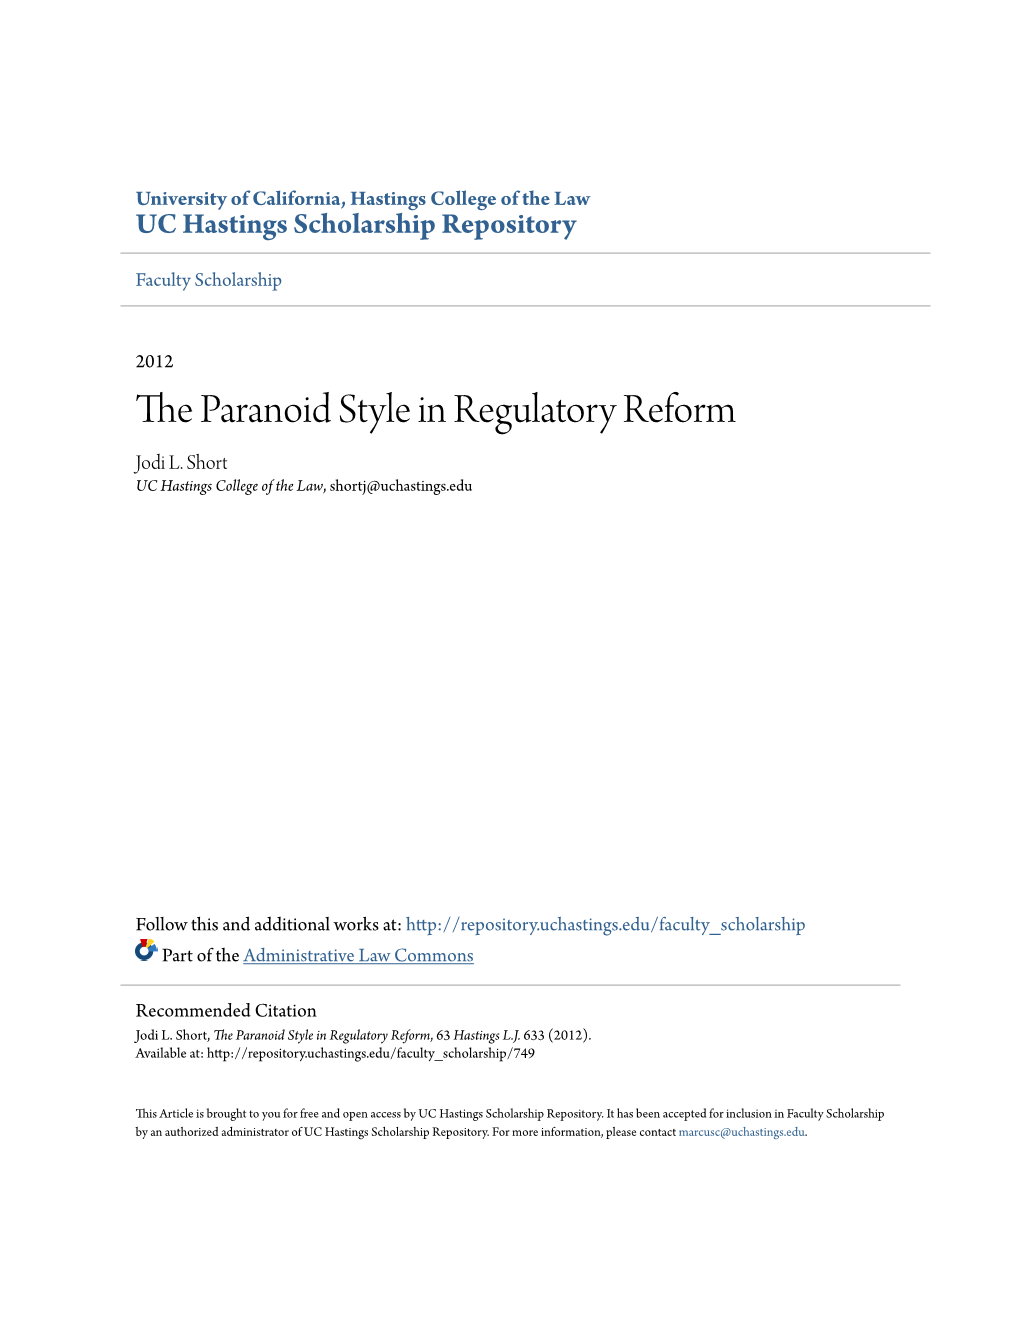 The Paranoid Style in Regulatory Reform, 63 Hastings L.J